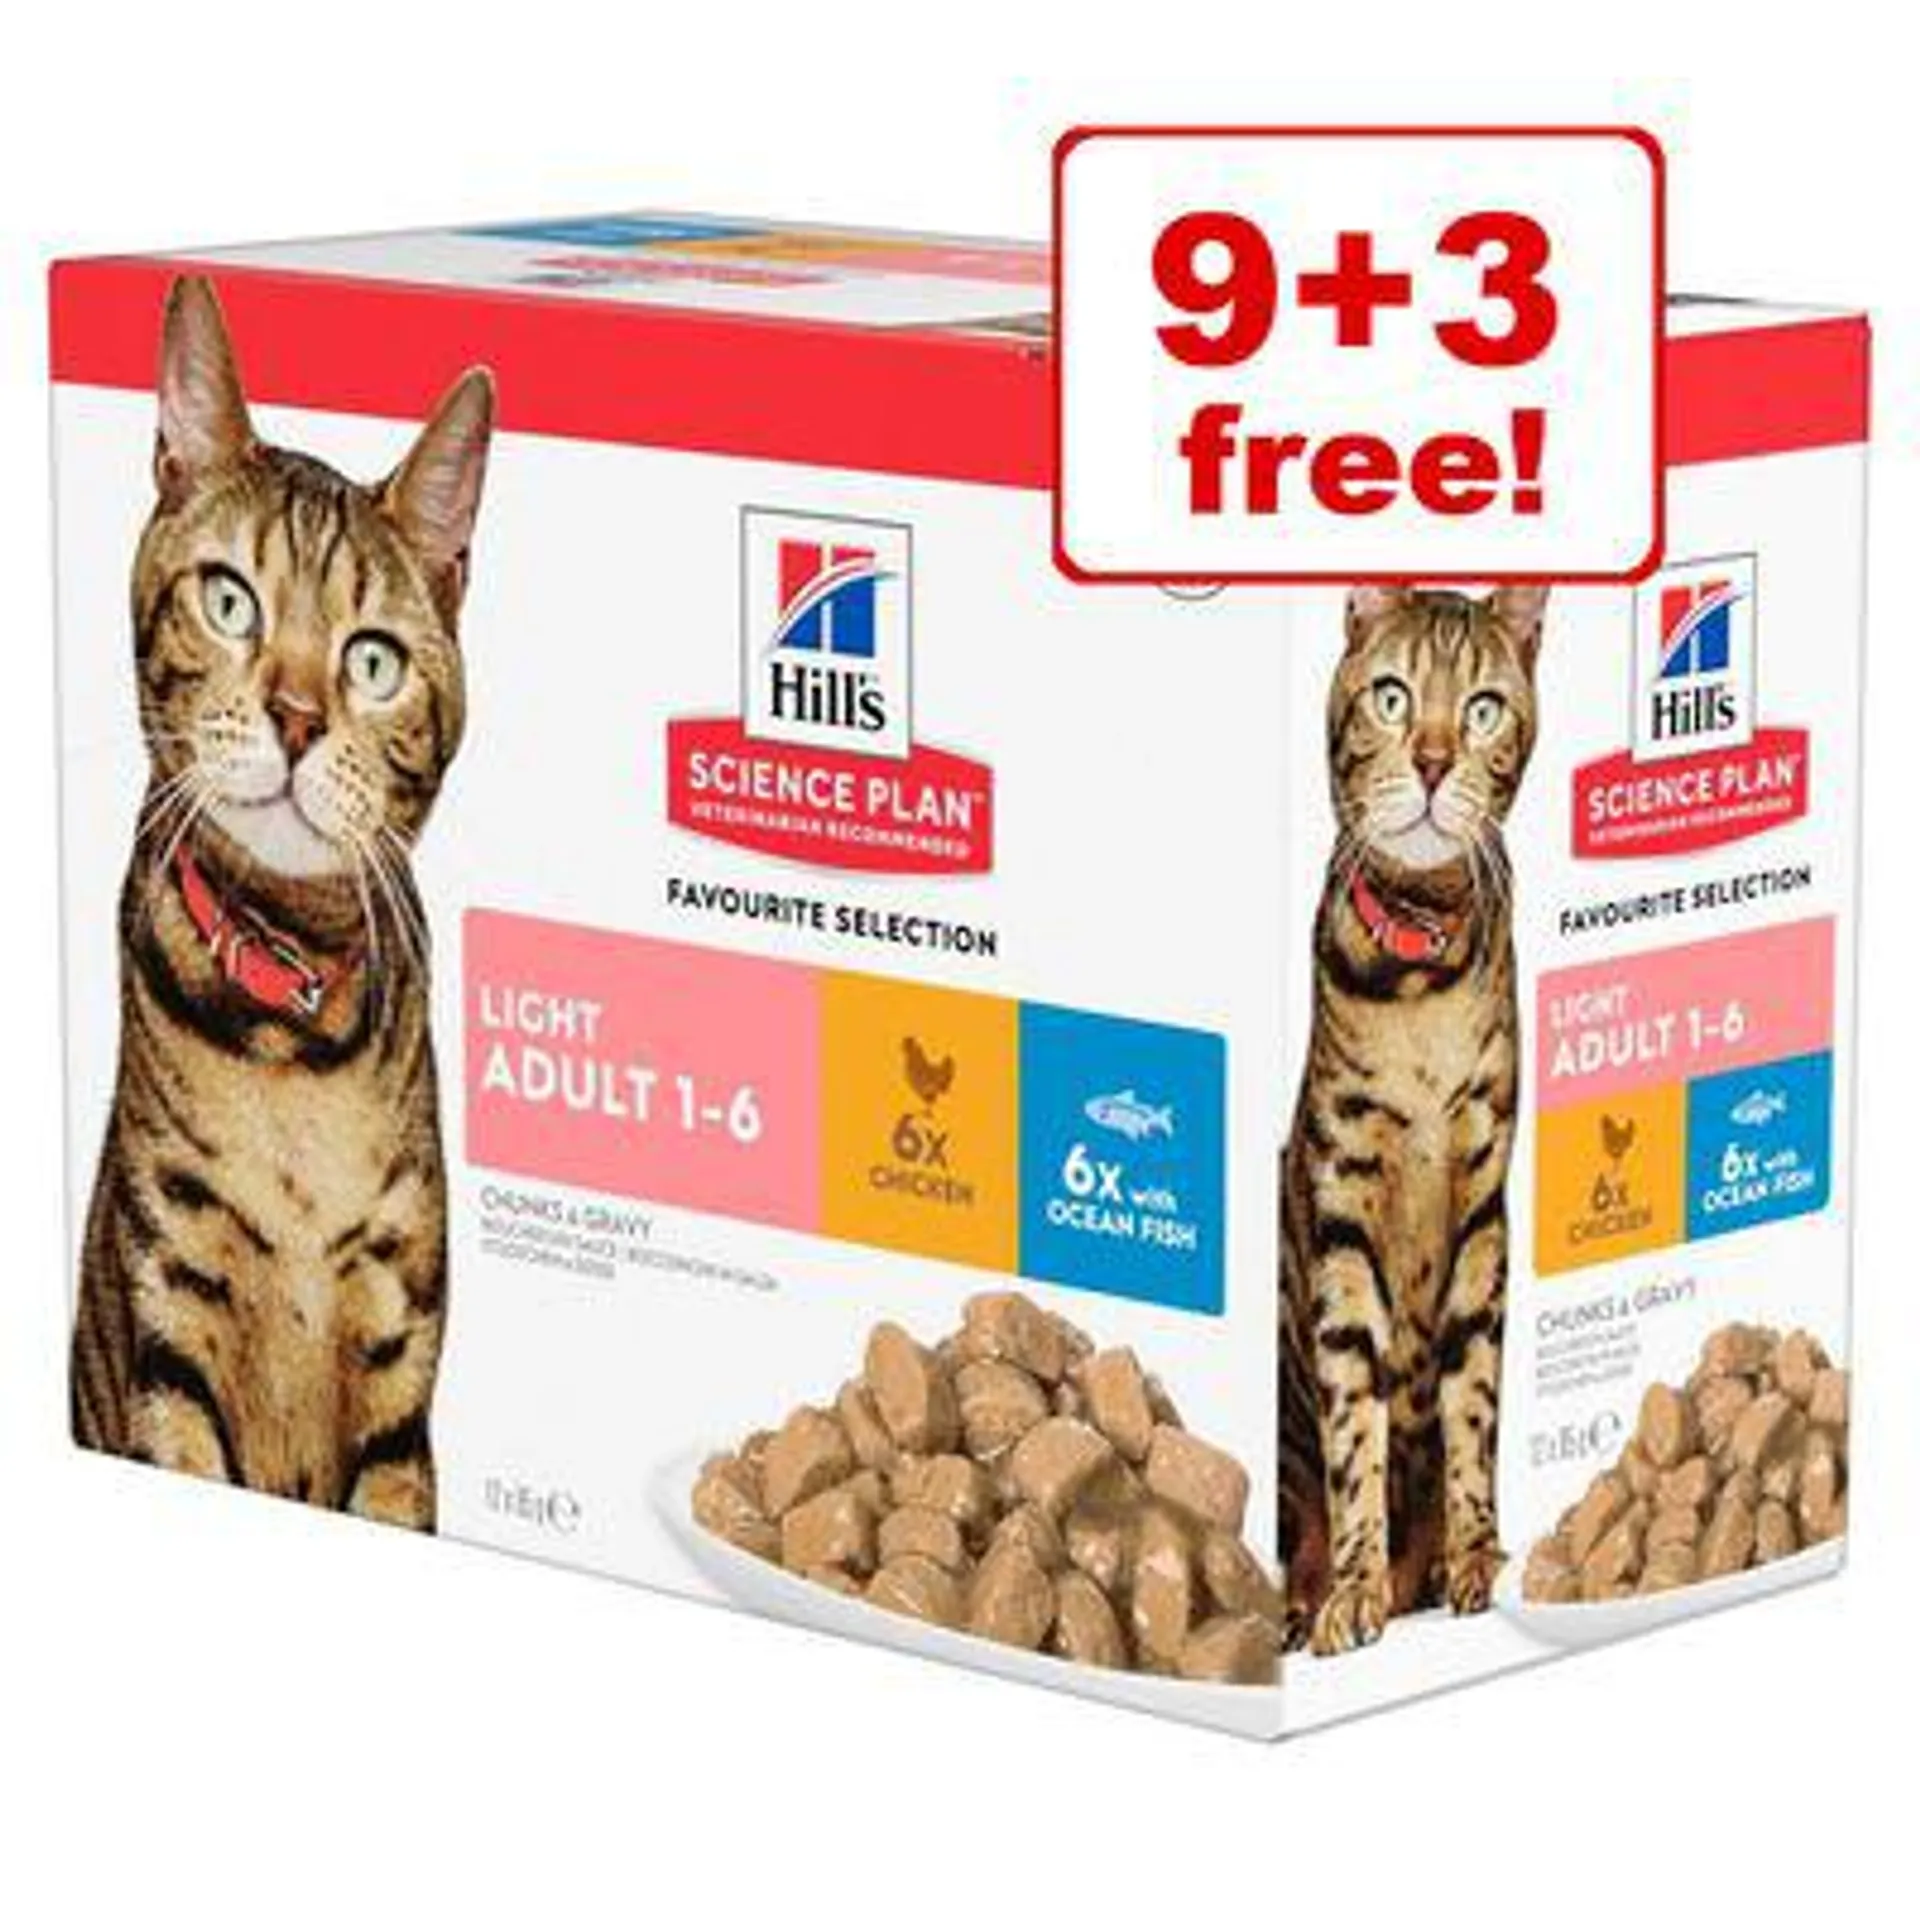 12 x 85g Hill's Science Plan Wet Cat Food - 9 + 3 Free! *